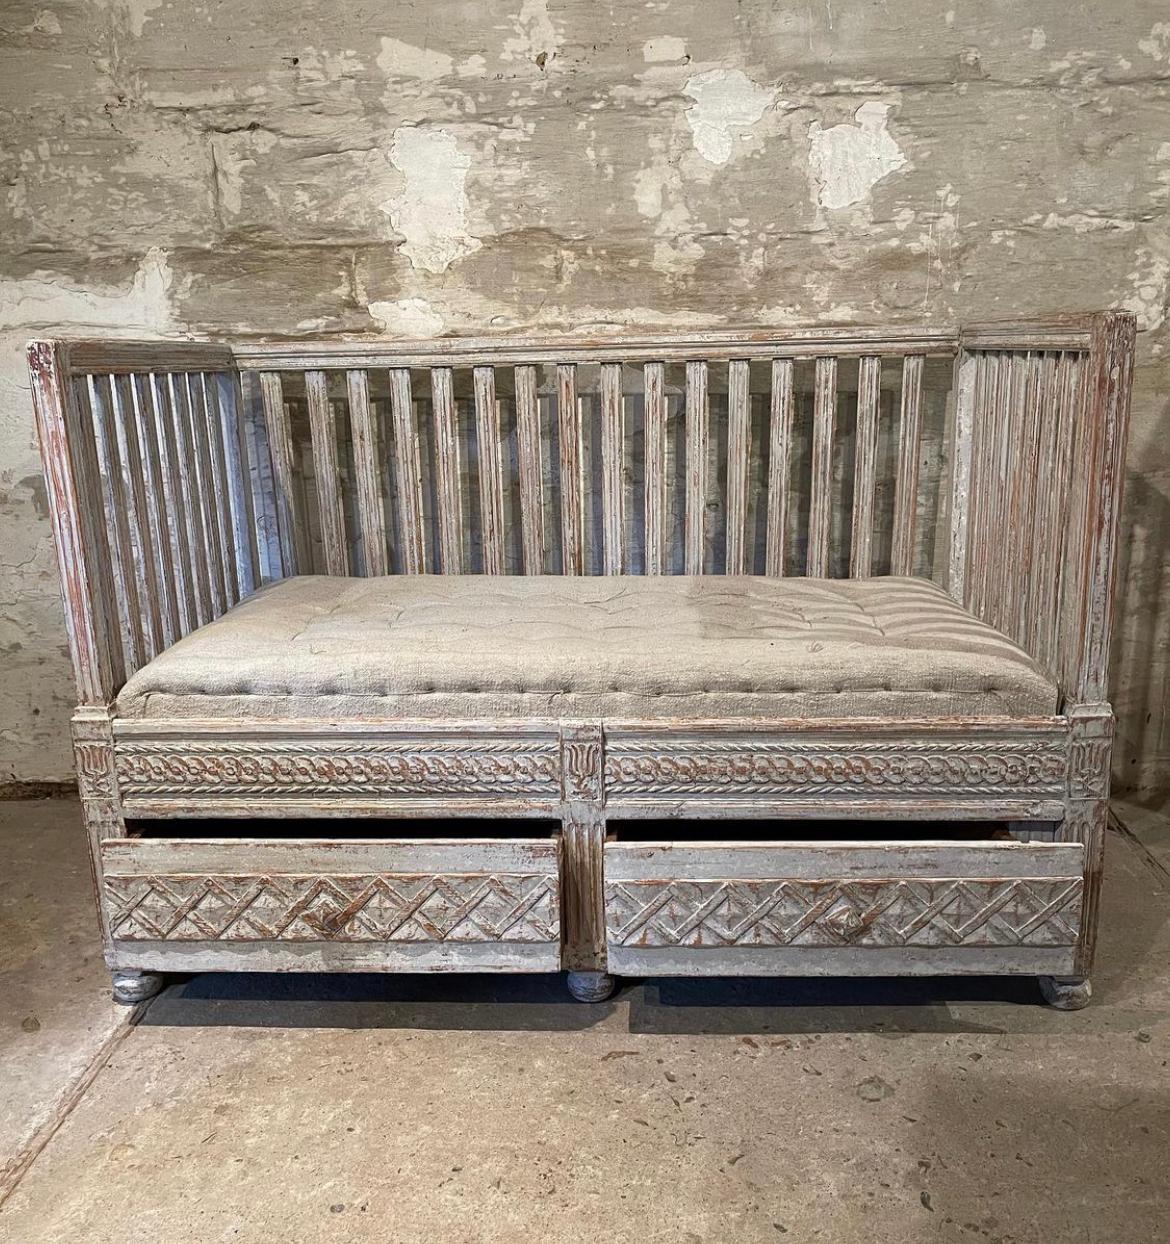 Hand-Crafted 18th Century Swedish Gustavian Daybed with Drawers and Belgian Linen